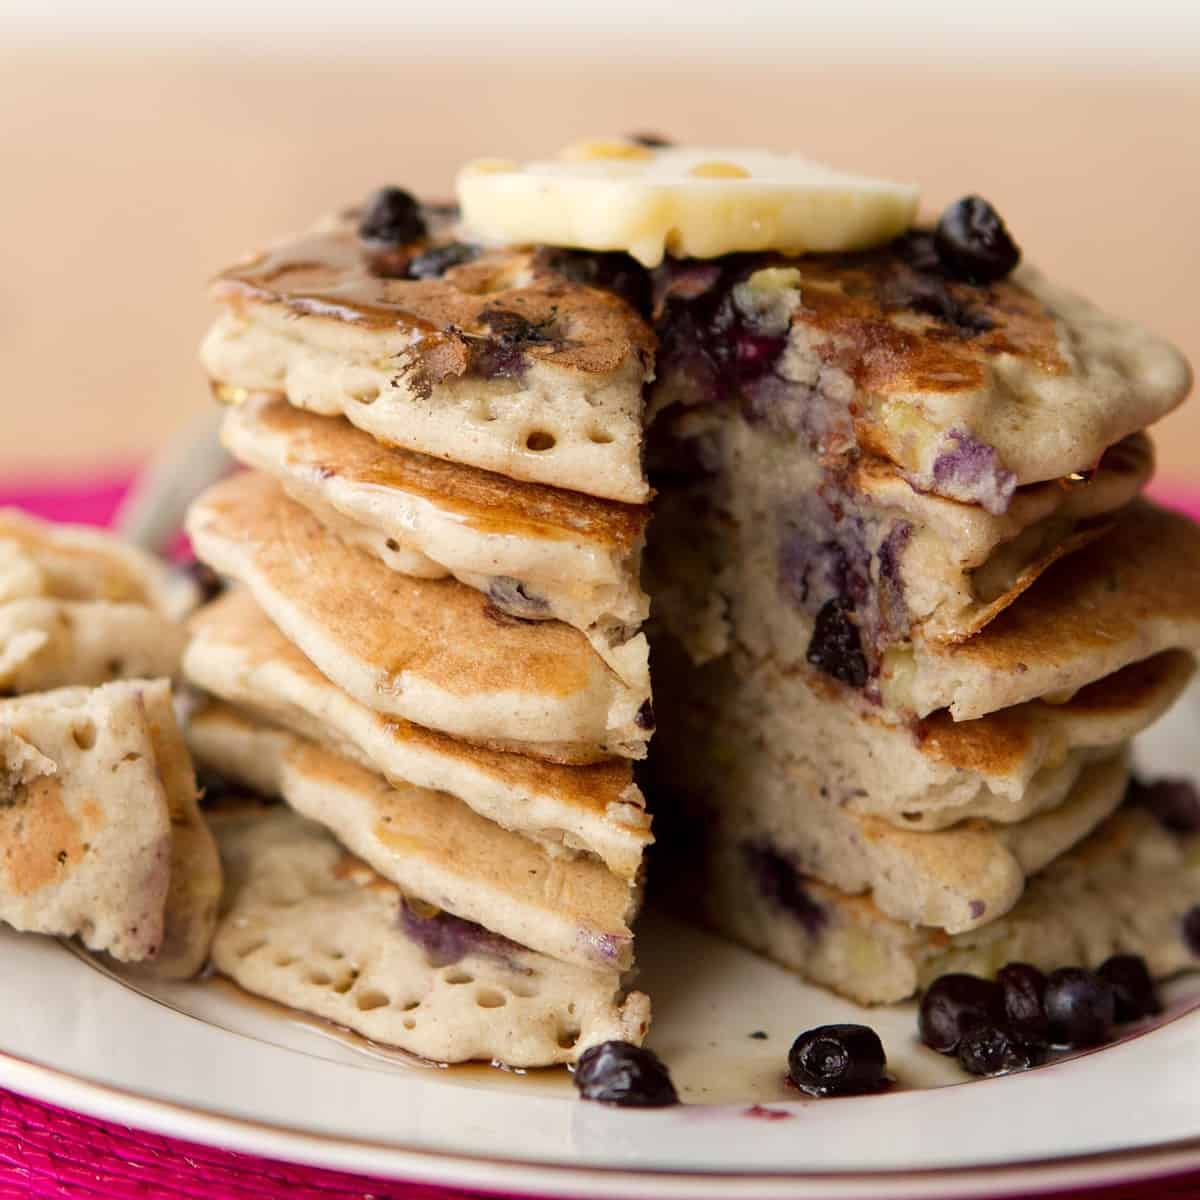  Top your pancakes with your favorite fruits and syrup for a burst of flavor and texture.